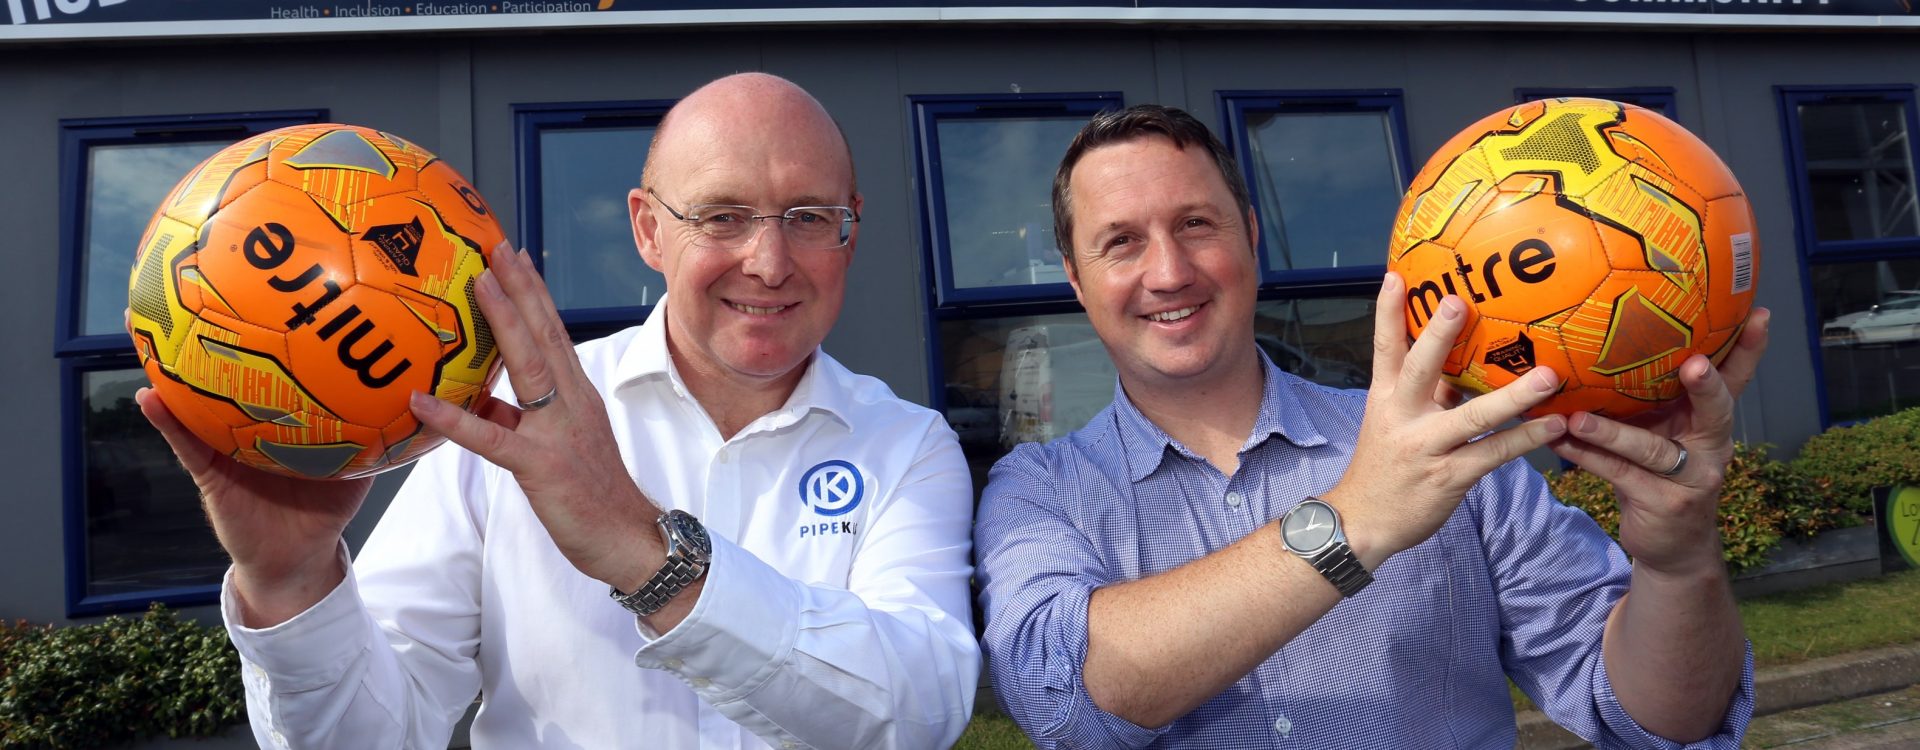 Jamie Edwards, STitC, and Martyn Rowlands, Pipekit pose with footballs